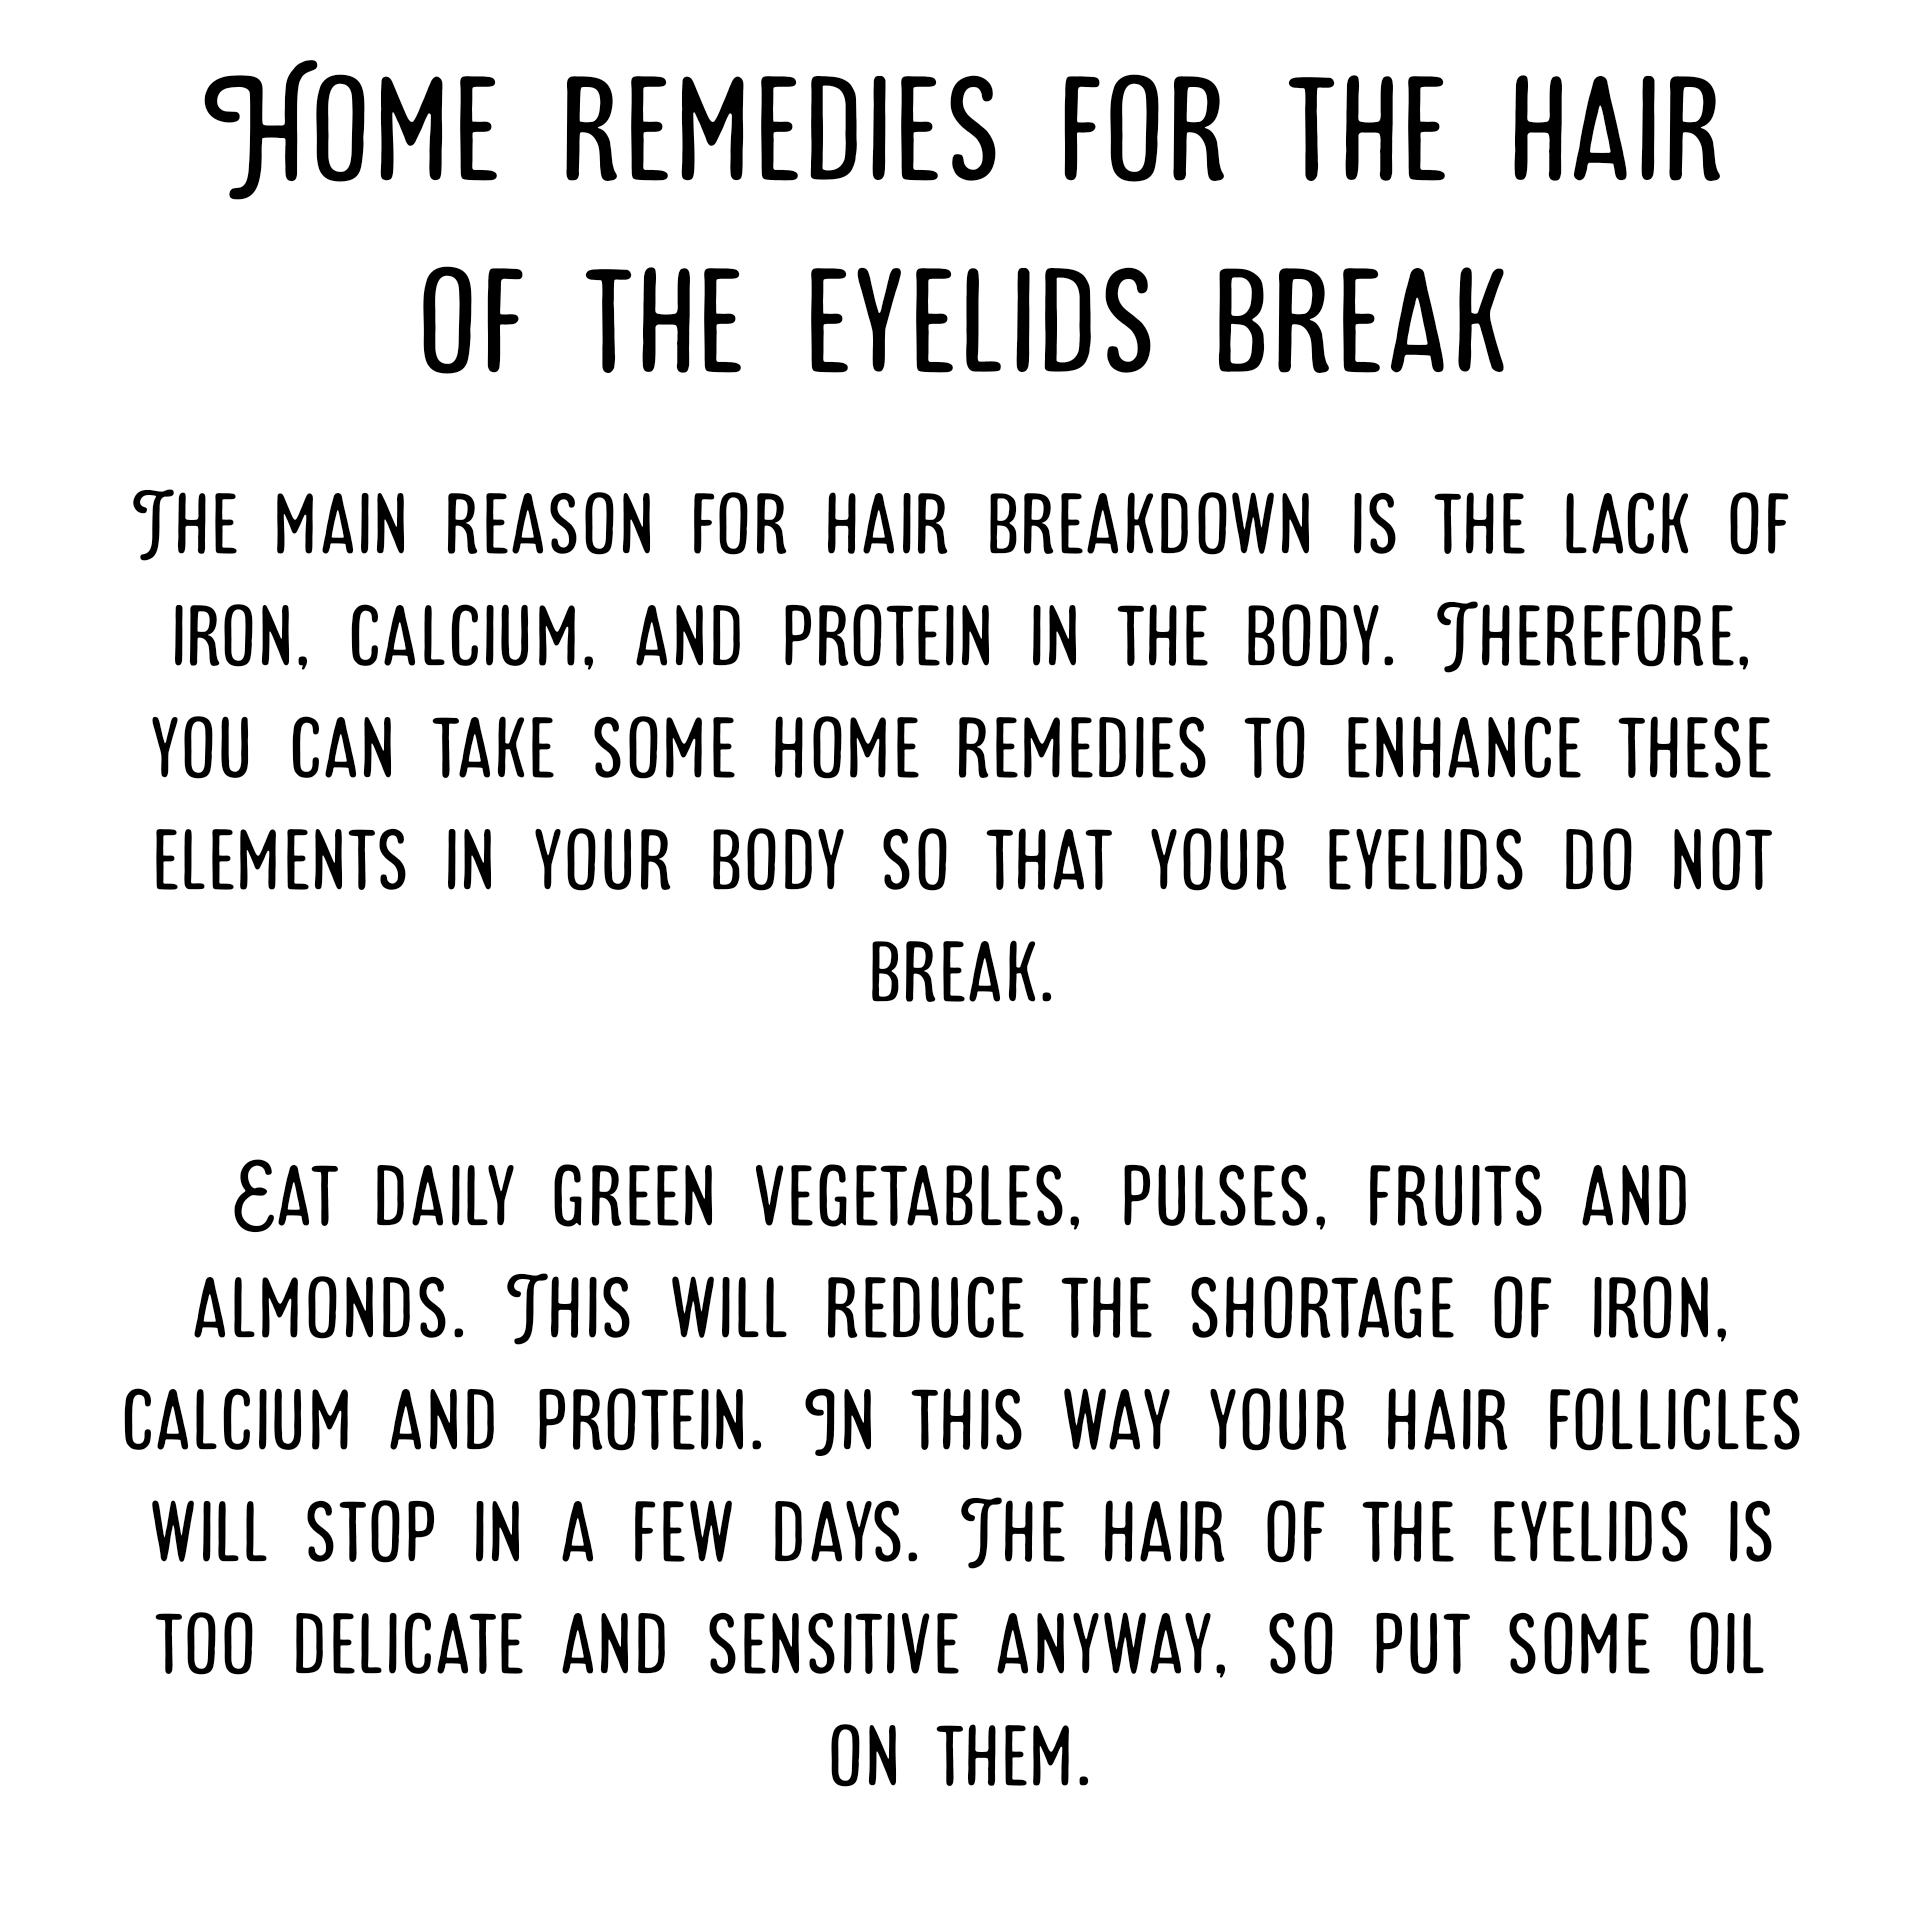 Home remedies for the hair of the eyelids break